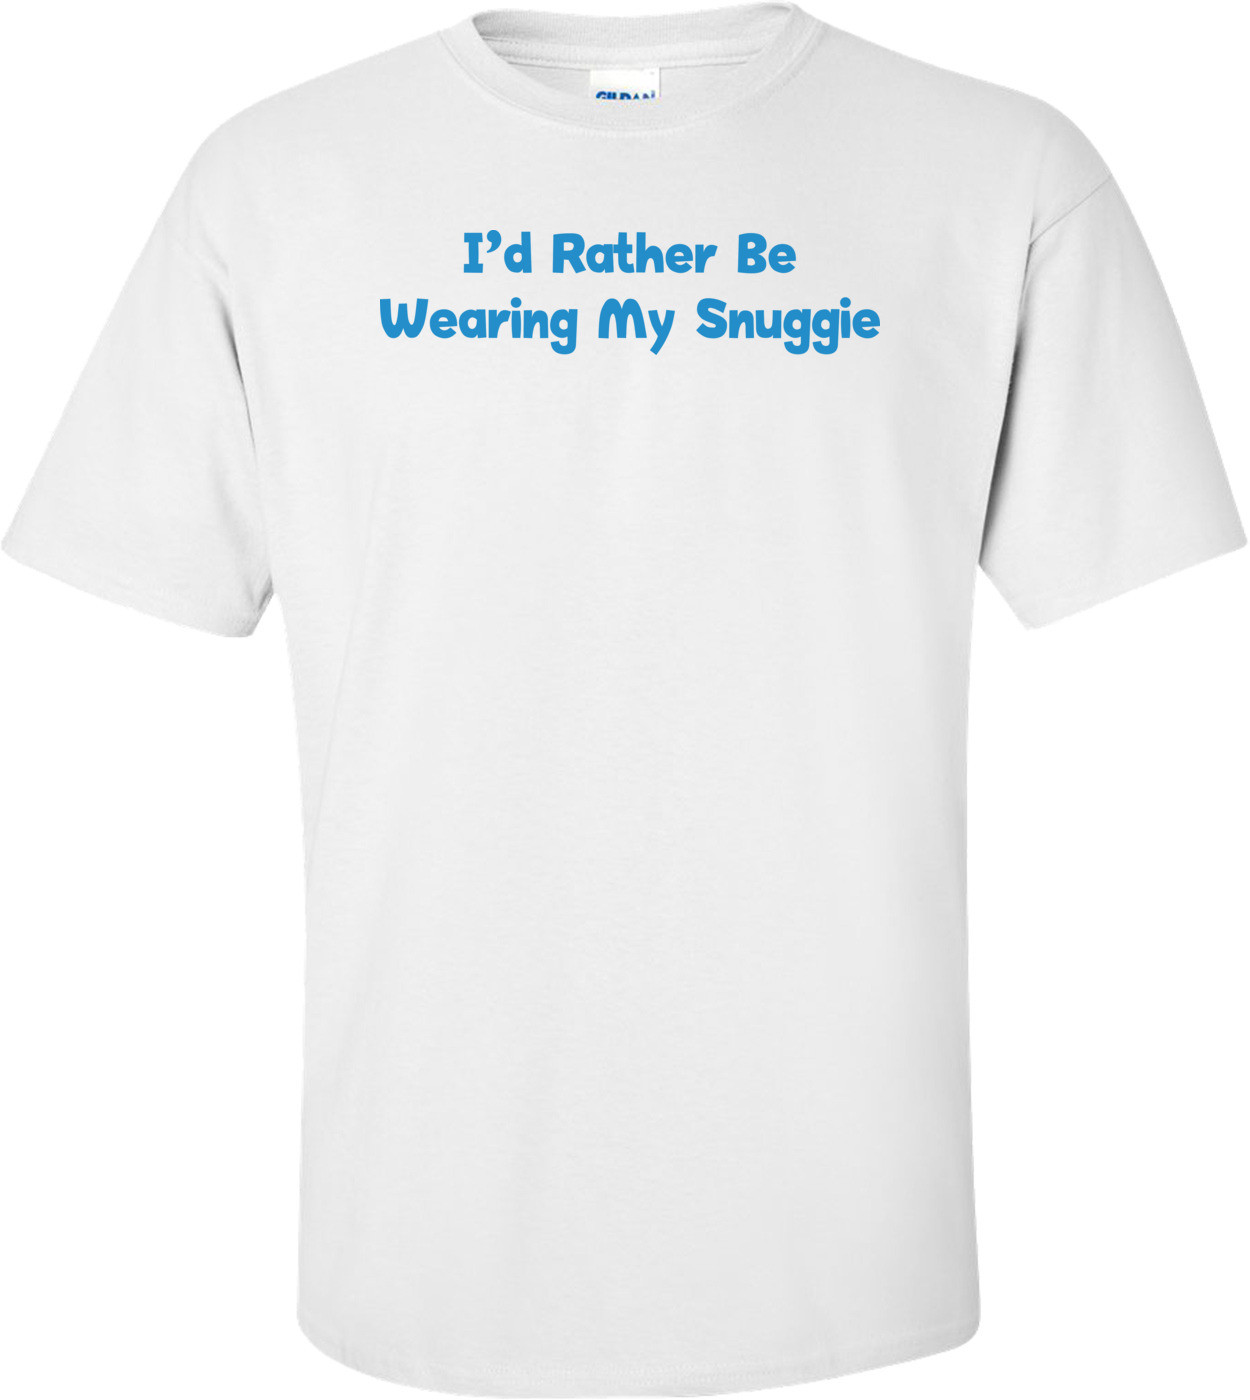 I'd Rather Be Wearing My Snuggie T-shirt